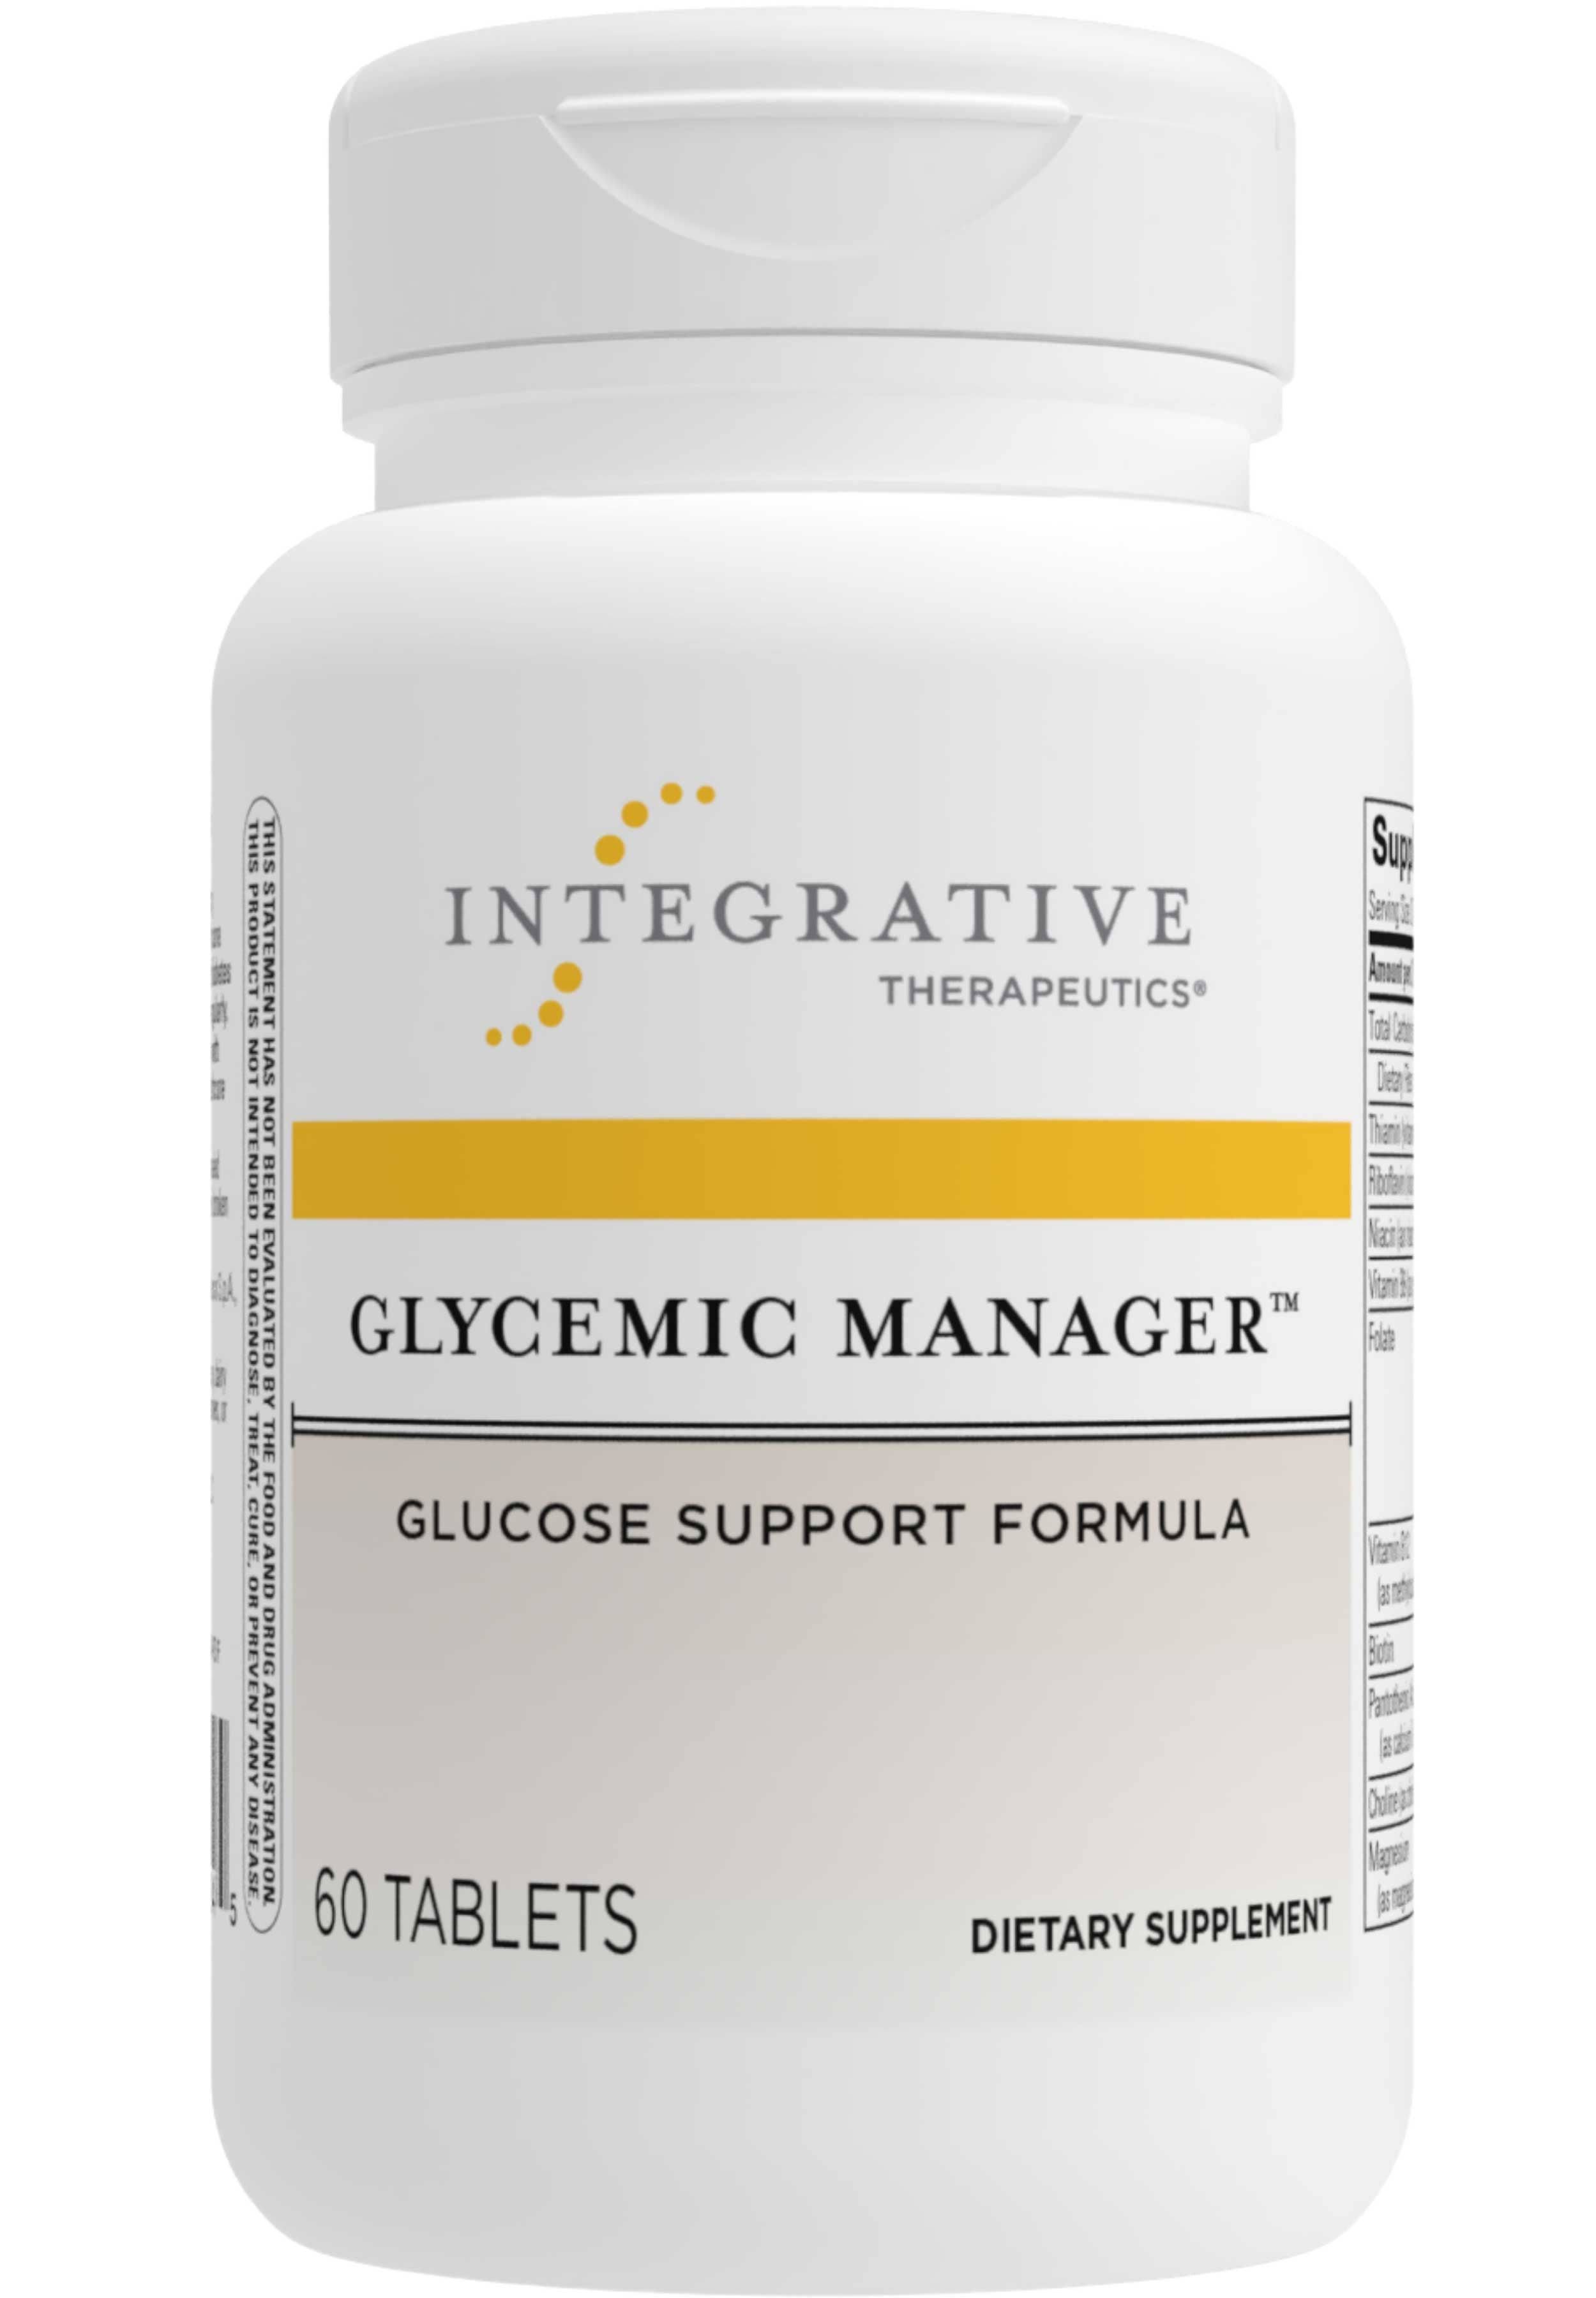 Integrative Therapeutics Glycemic Manager - 60ct